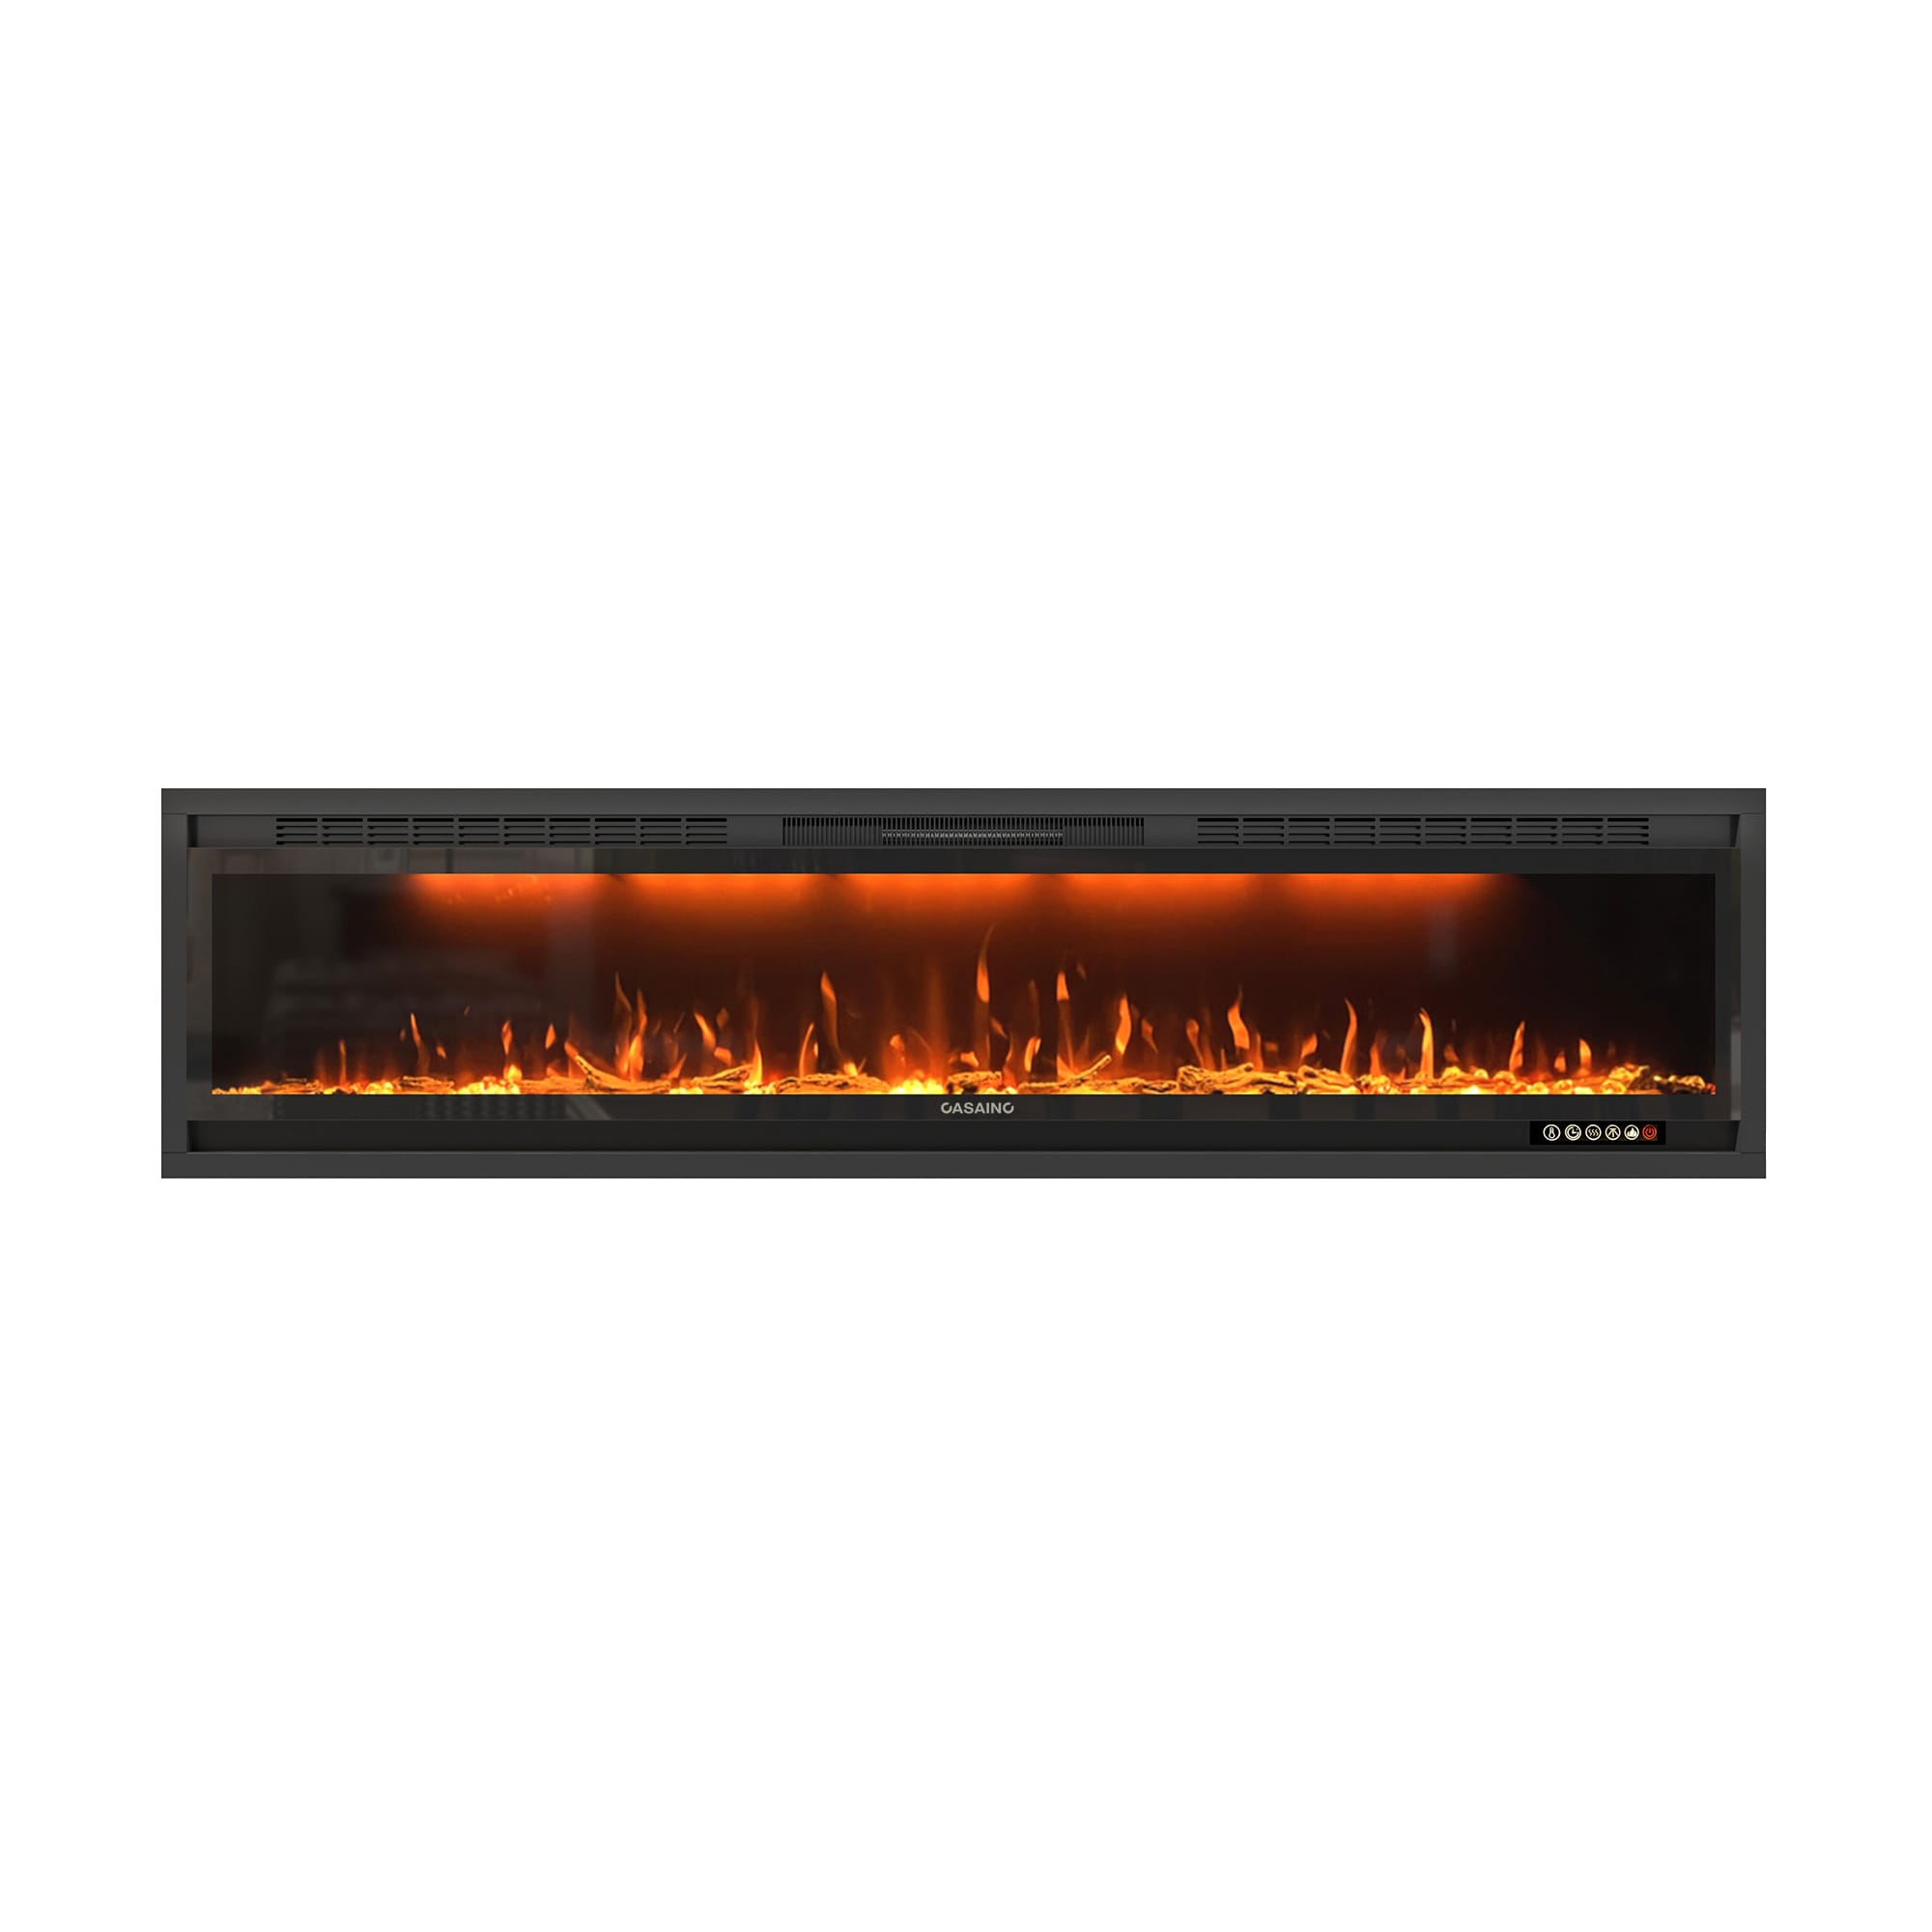  74 Inch Wall-Mounted and Recessed Electric Fireplace in Black